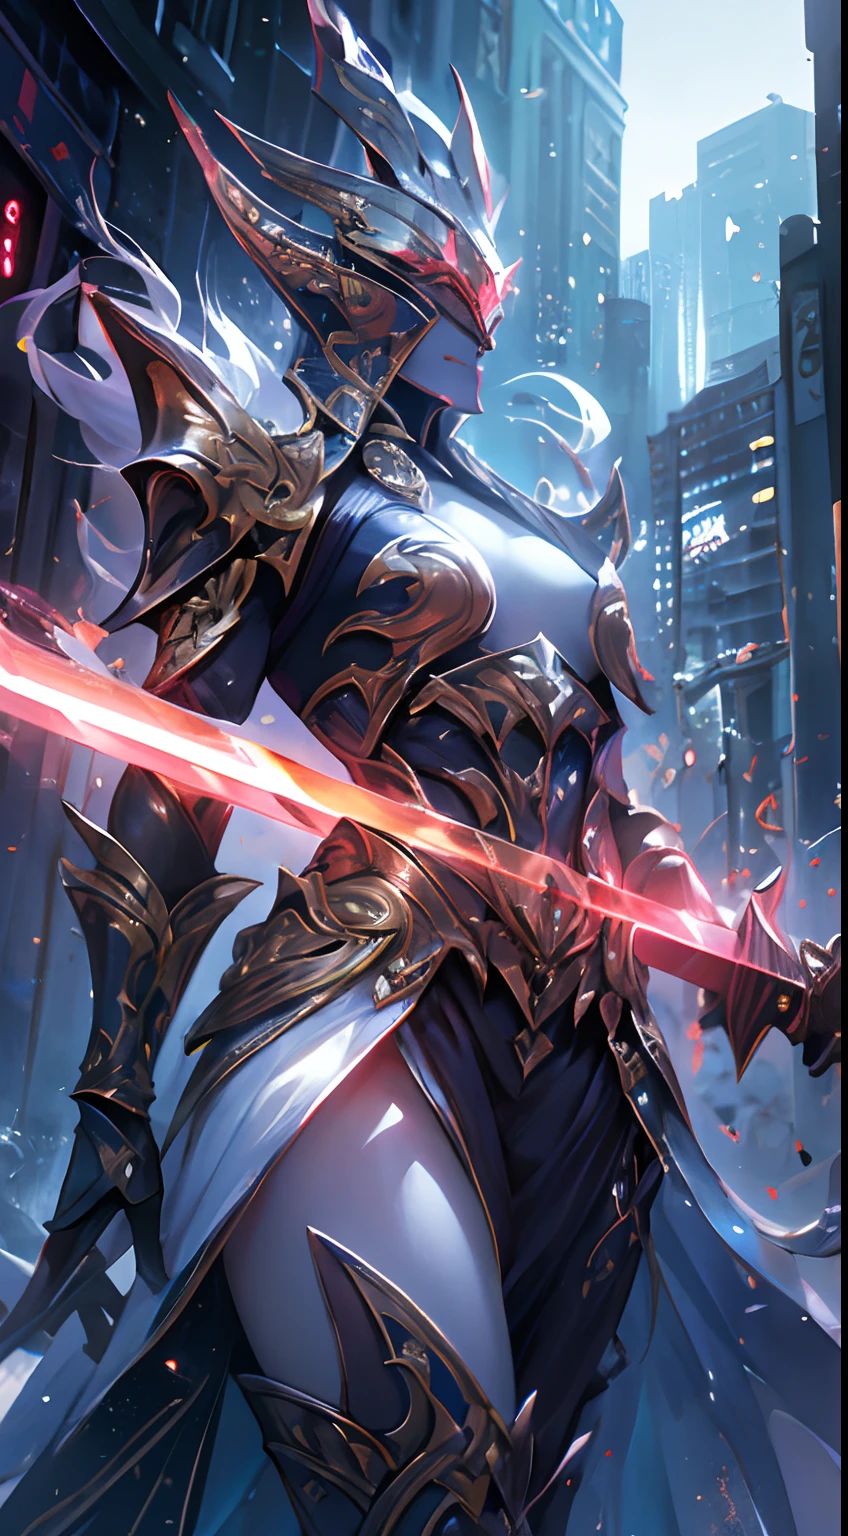 "An awesome paladin wields a sword full of light, Exudes powerful light magic. Set in a dark and mysterious cityscape, Illuminated by the light of the Paladin's Sword. The composition is professionally crafted, Amazing attention to detail and cinematic lighting. The overall aesthetic is reminiscent of Fujifilm photography, Capture the beauty and depth of the scene."